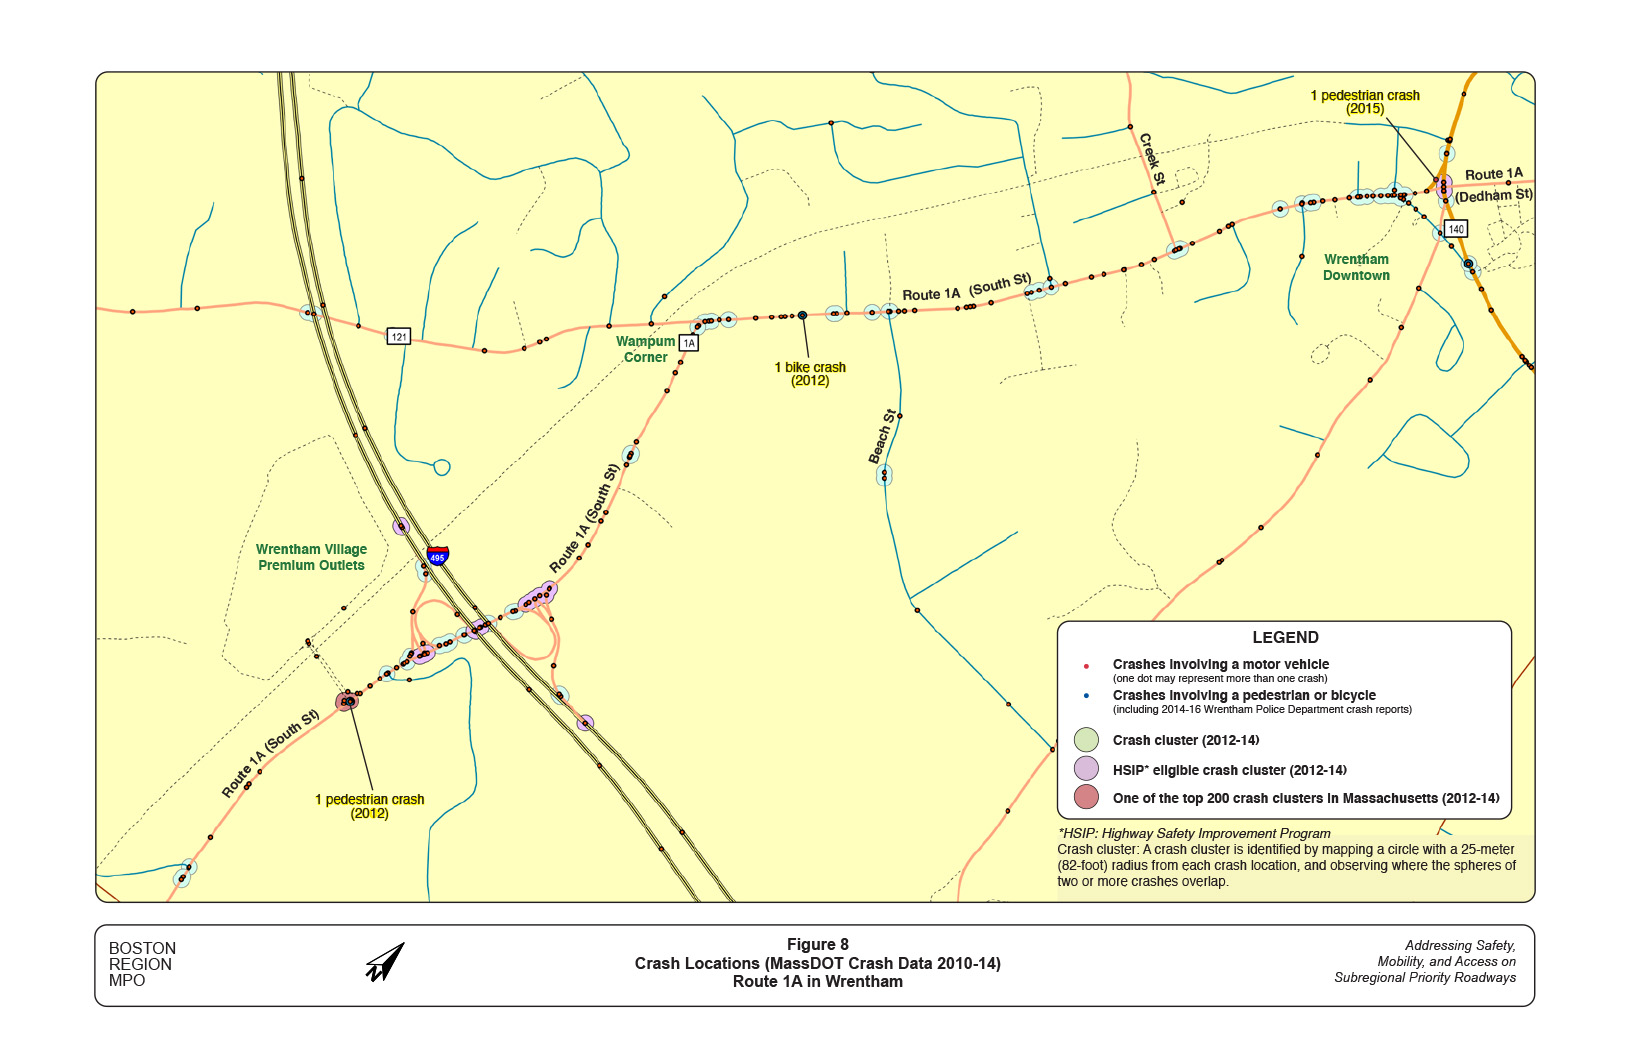 Figure 8 is a map with overlays showing the locations of crashes, and crash clusters, which occurred on Route 1A in Wrentham.